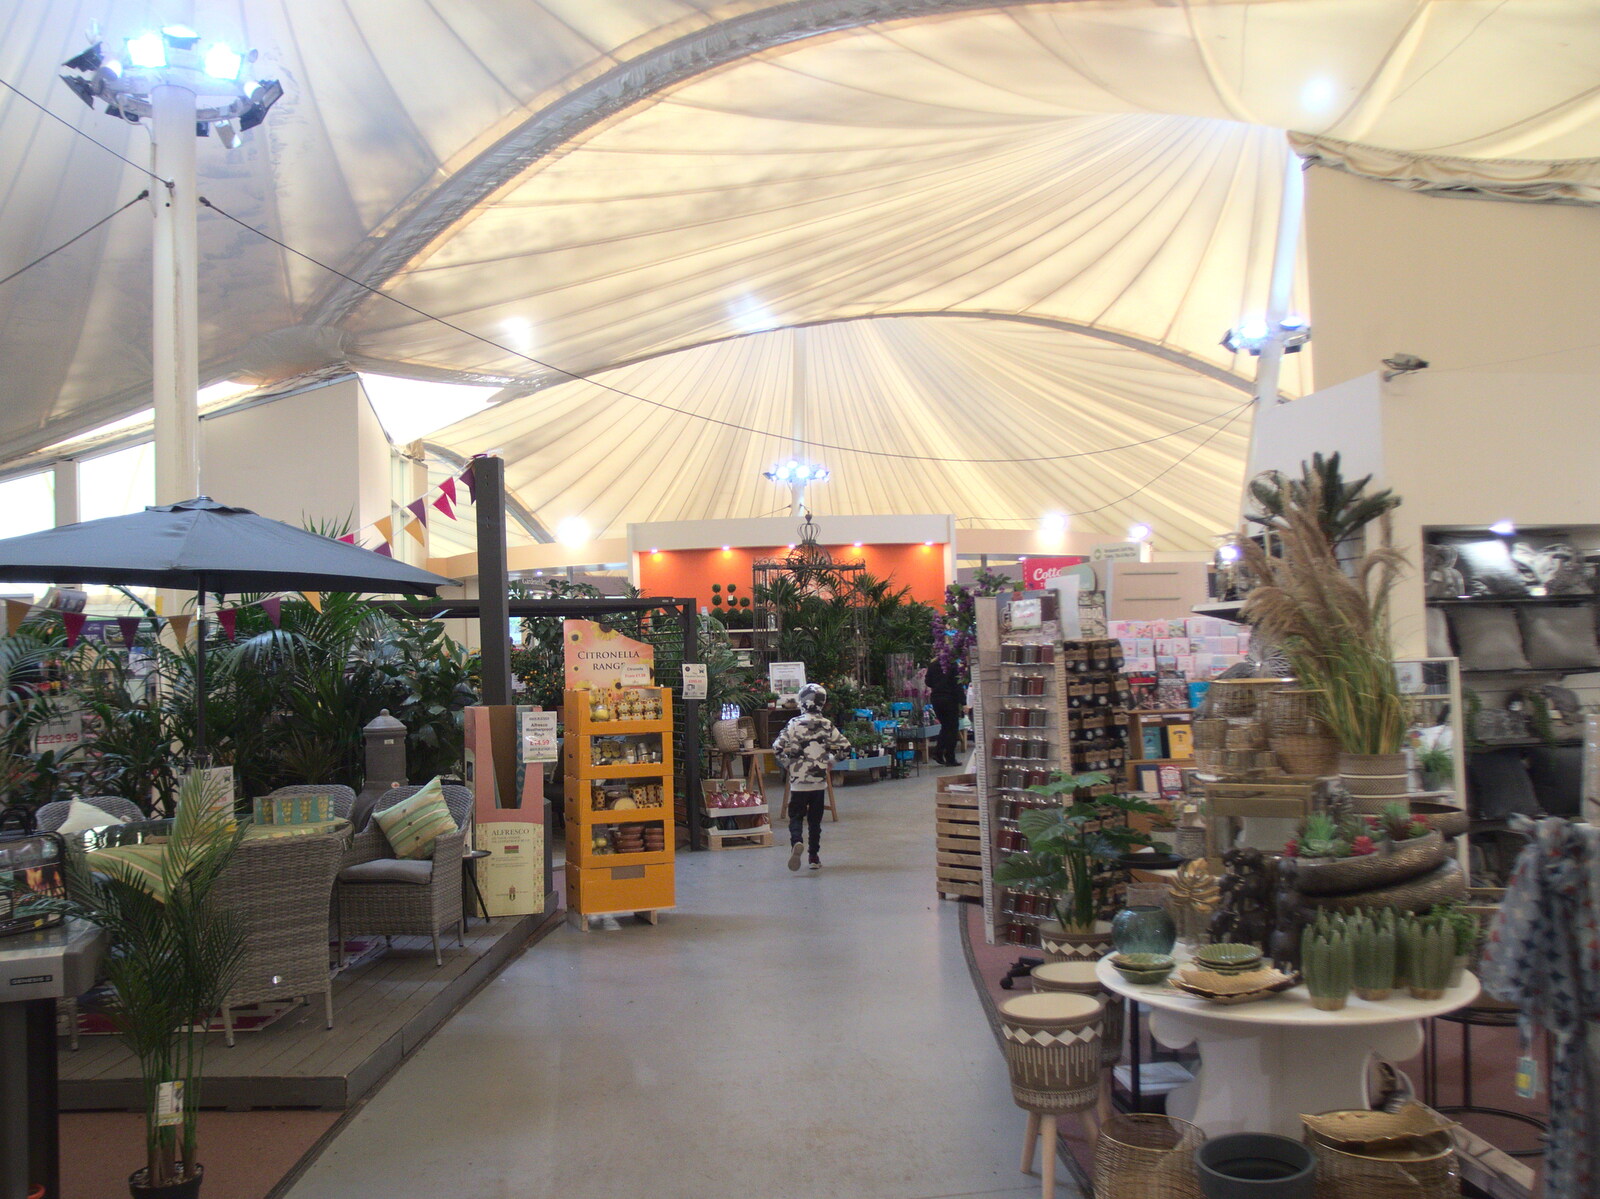 Harry in Bressingham Garden Centre from Garden Centres, and Hamish Visits, Brome, Suffolk - 28th May 2021